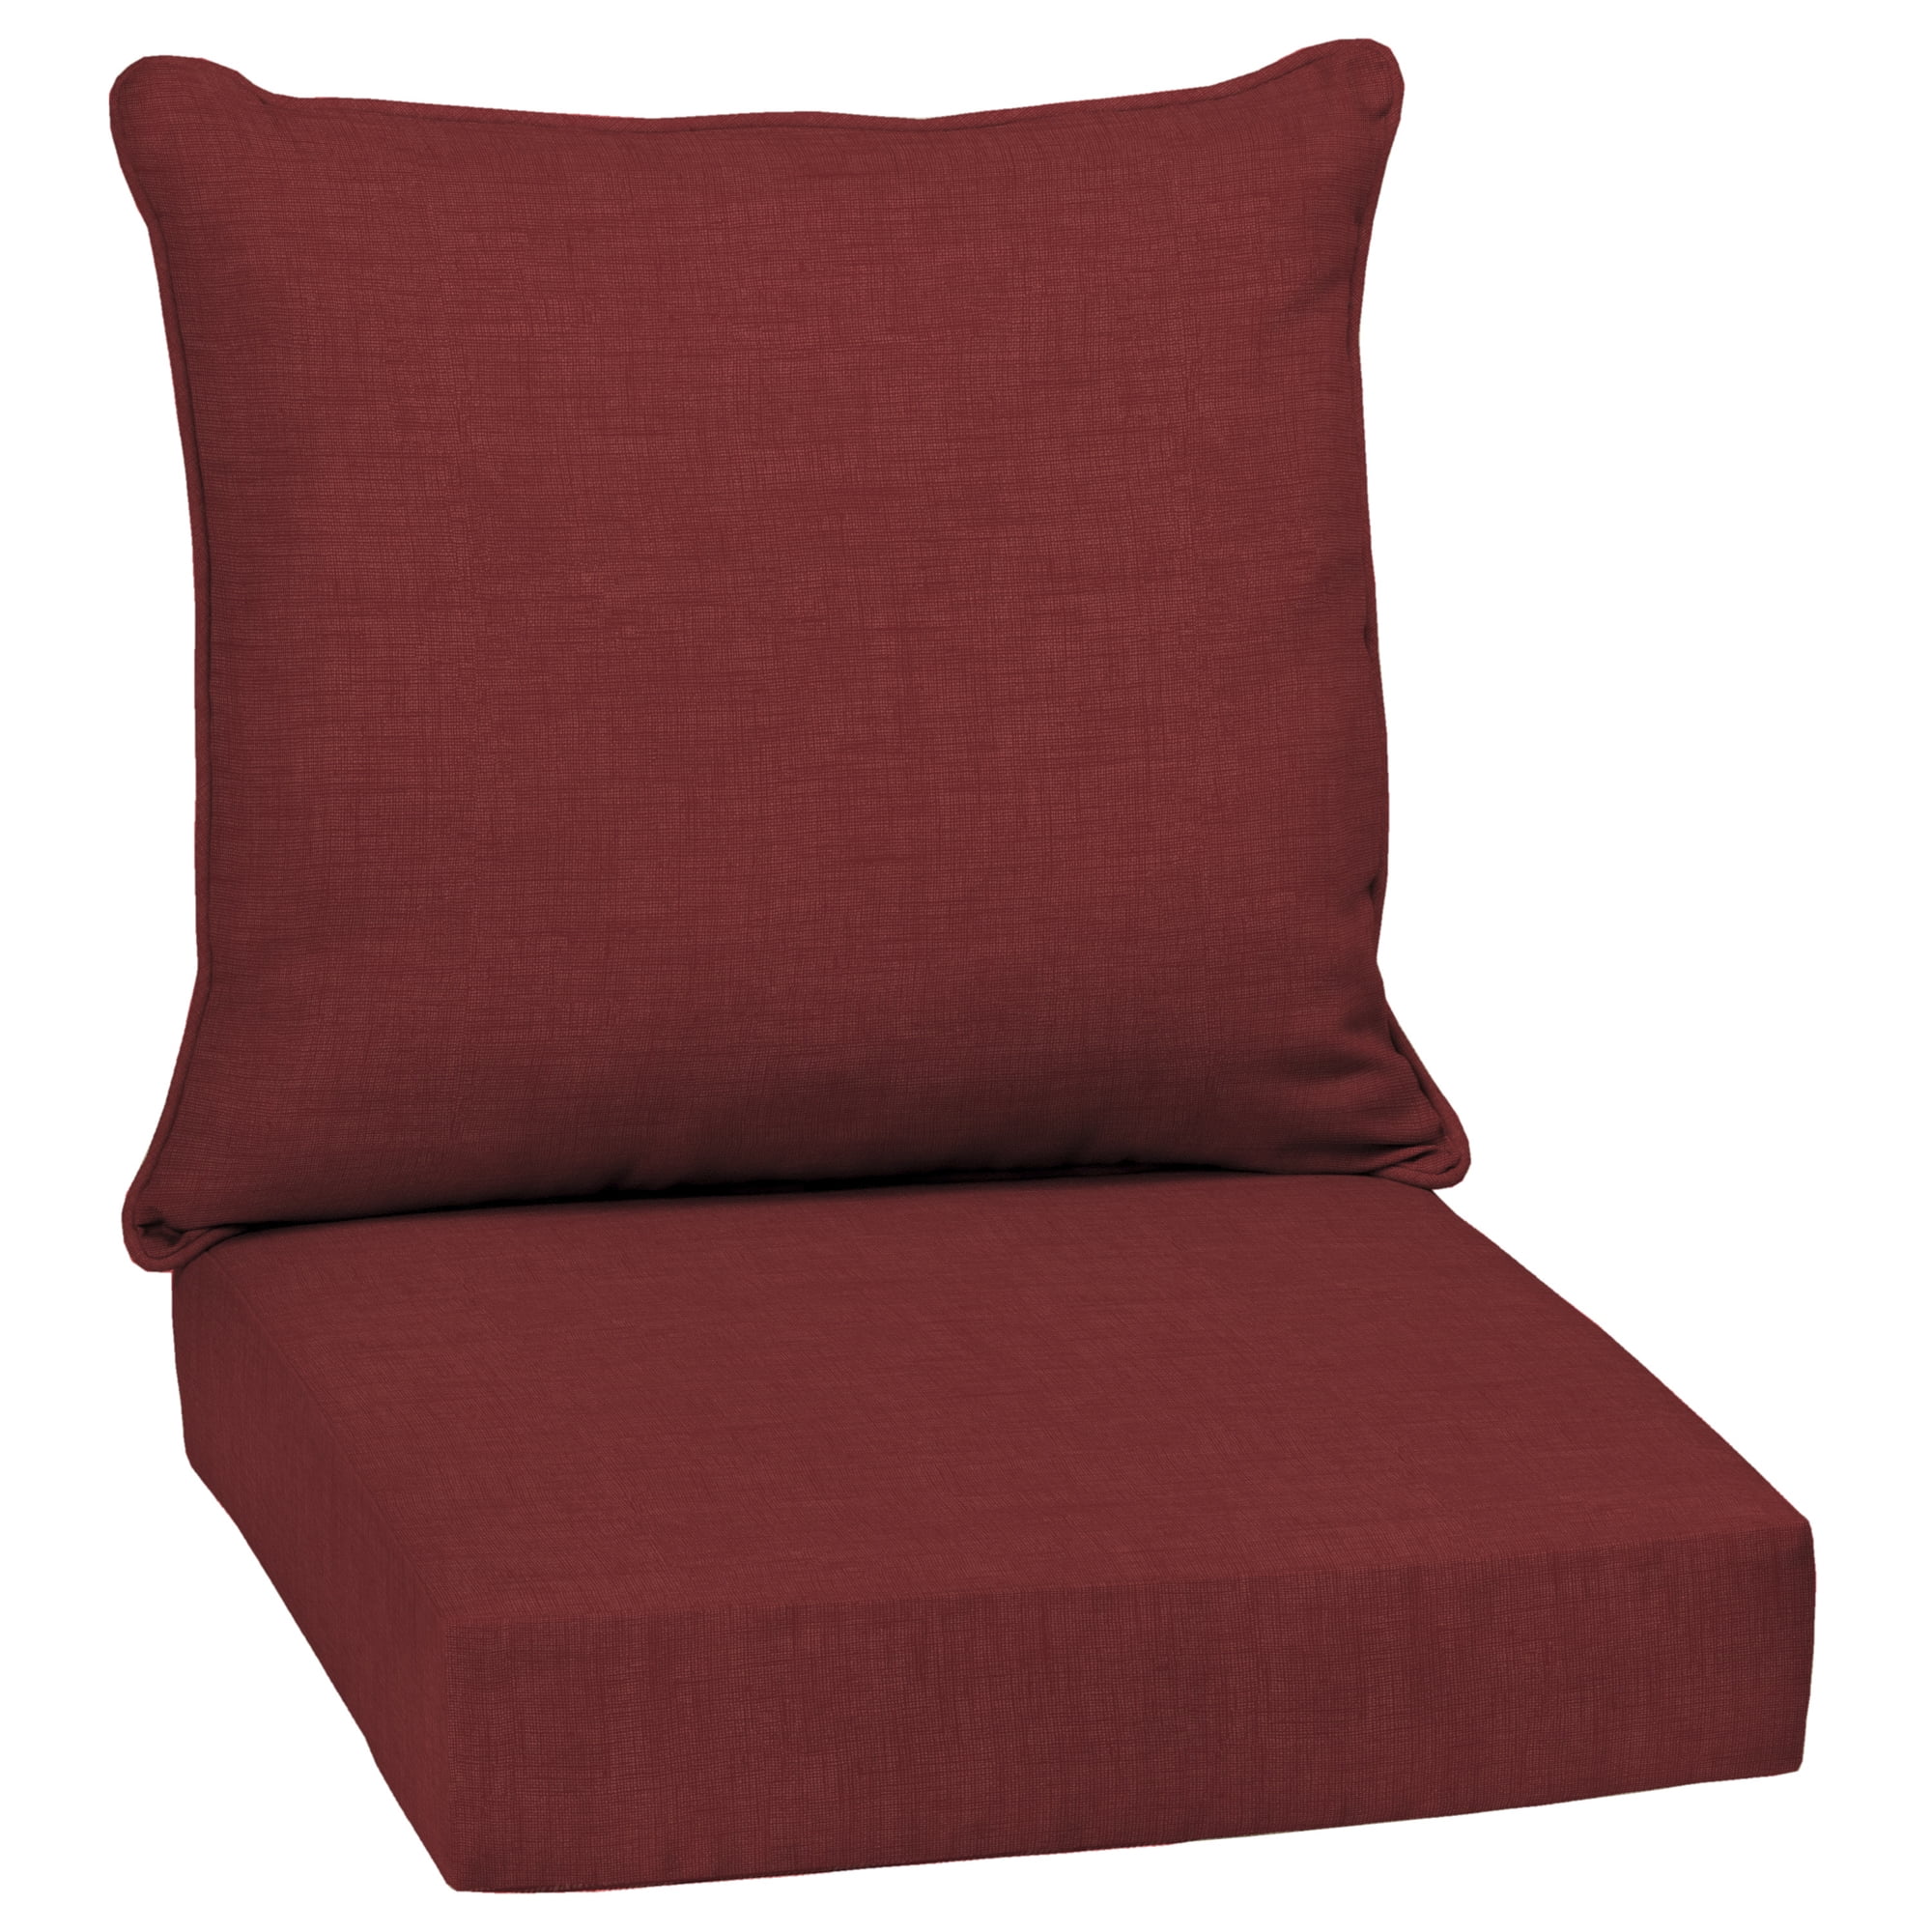 Arden Selections Ruby Leala 46.5 x 24 in Outdoor Deep Seat Cushion Set 